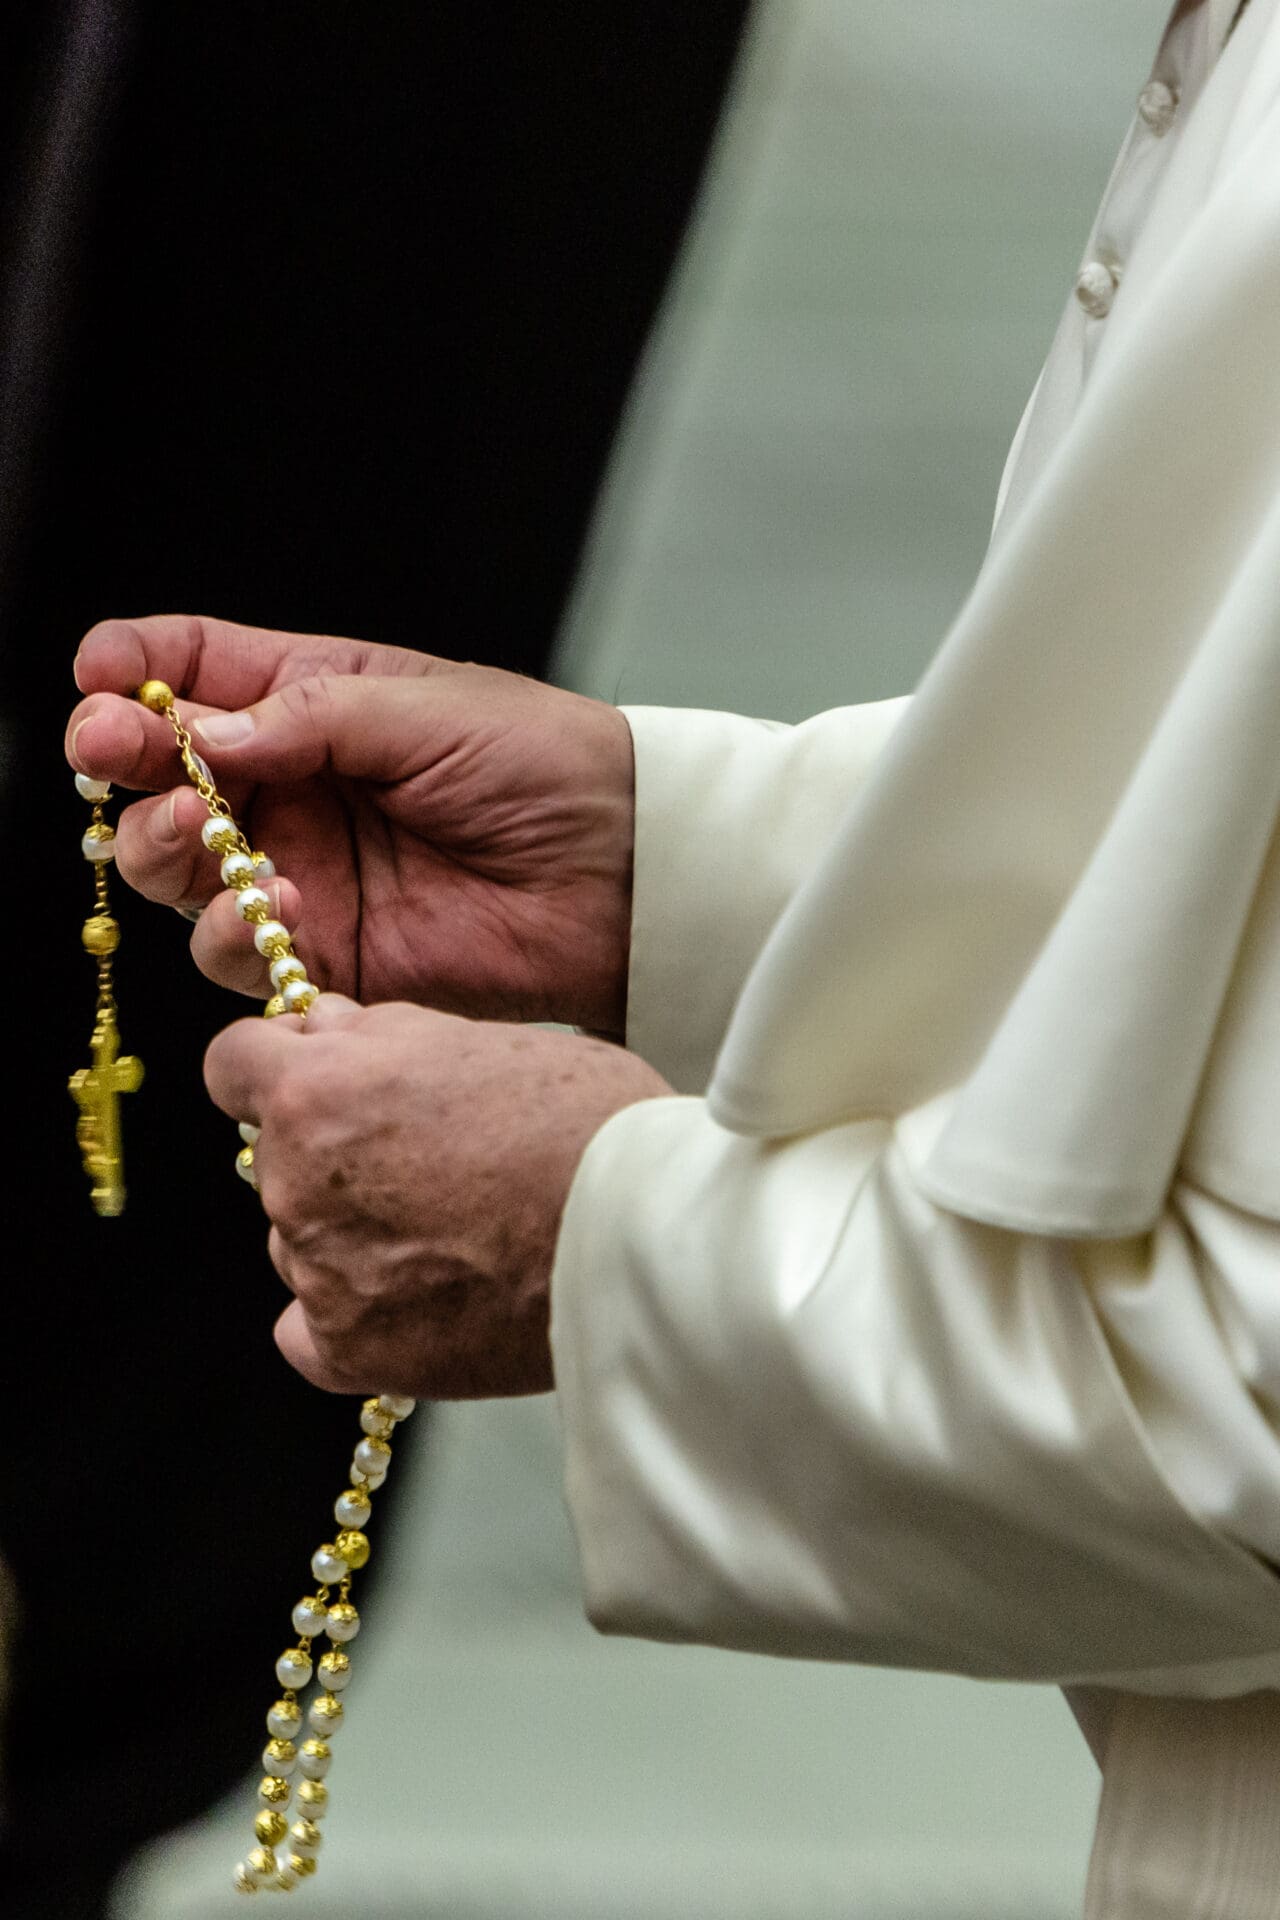 Pope Francis: St. Pius V Teaches Us to Seek Truth, Pray the Rosary